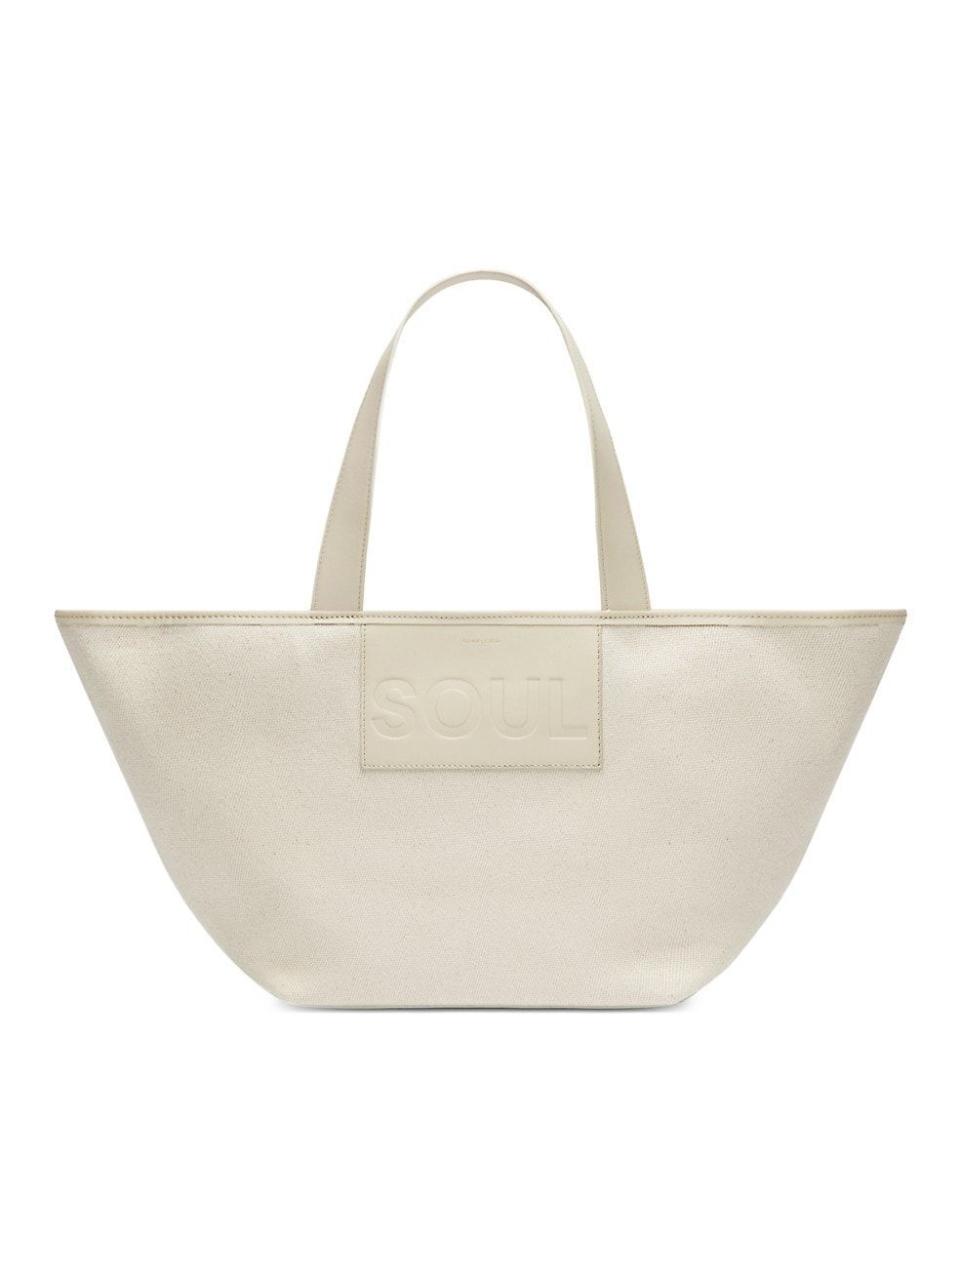 The Soul Tote